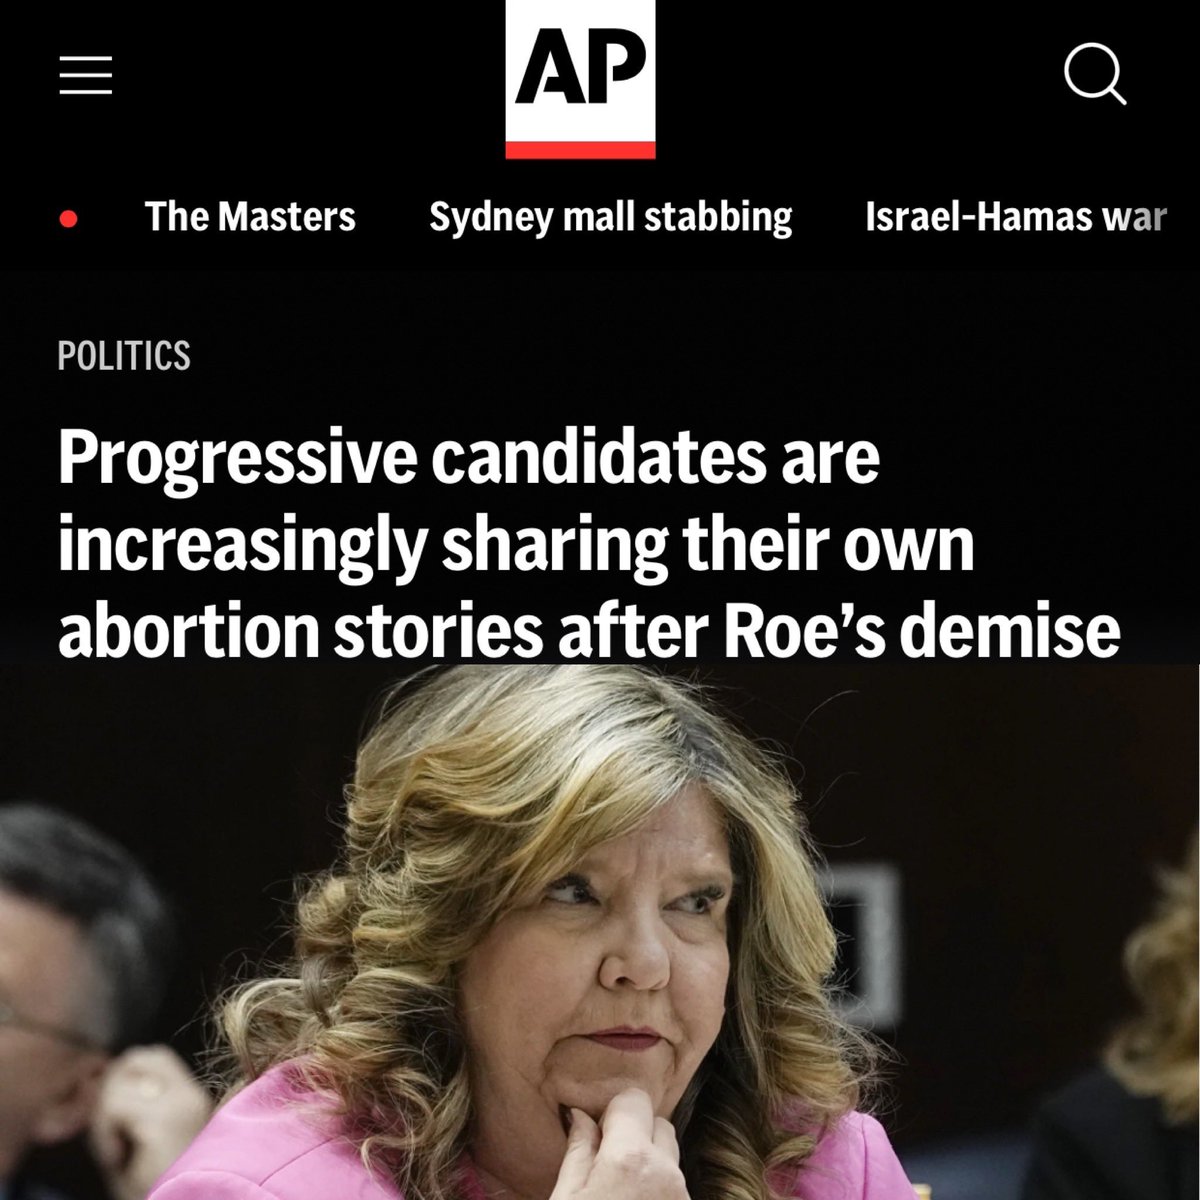 GLORIA: “I’m letting you know that I’m a woman who cares about women’s reproductive choice. To me it’s about equality and rights.” This AP story on candidates telling their personal abortion stories features @VoteGloriaJ & @allie4tn here in Tennessee. apnews.com/article/aborti…